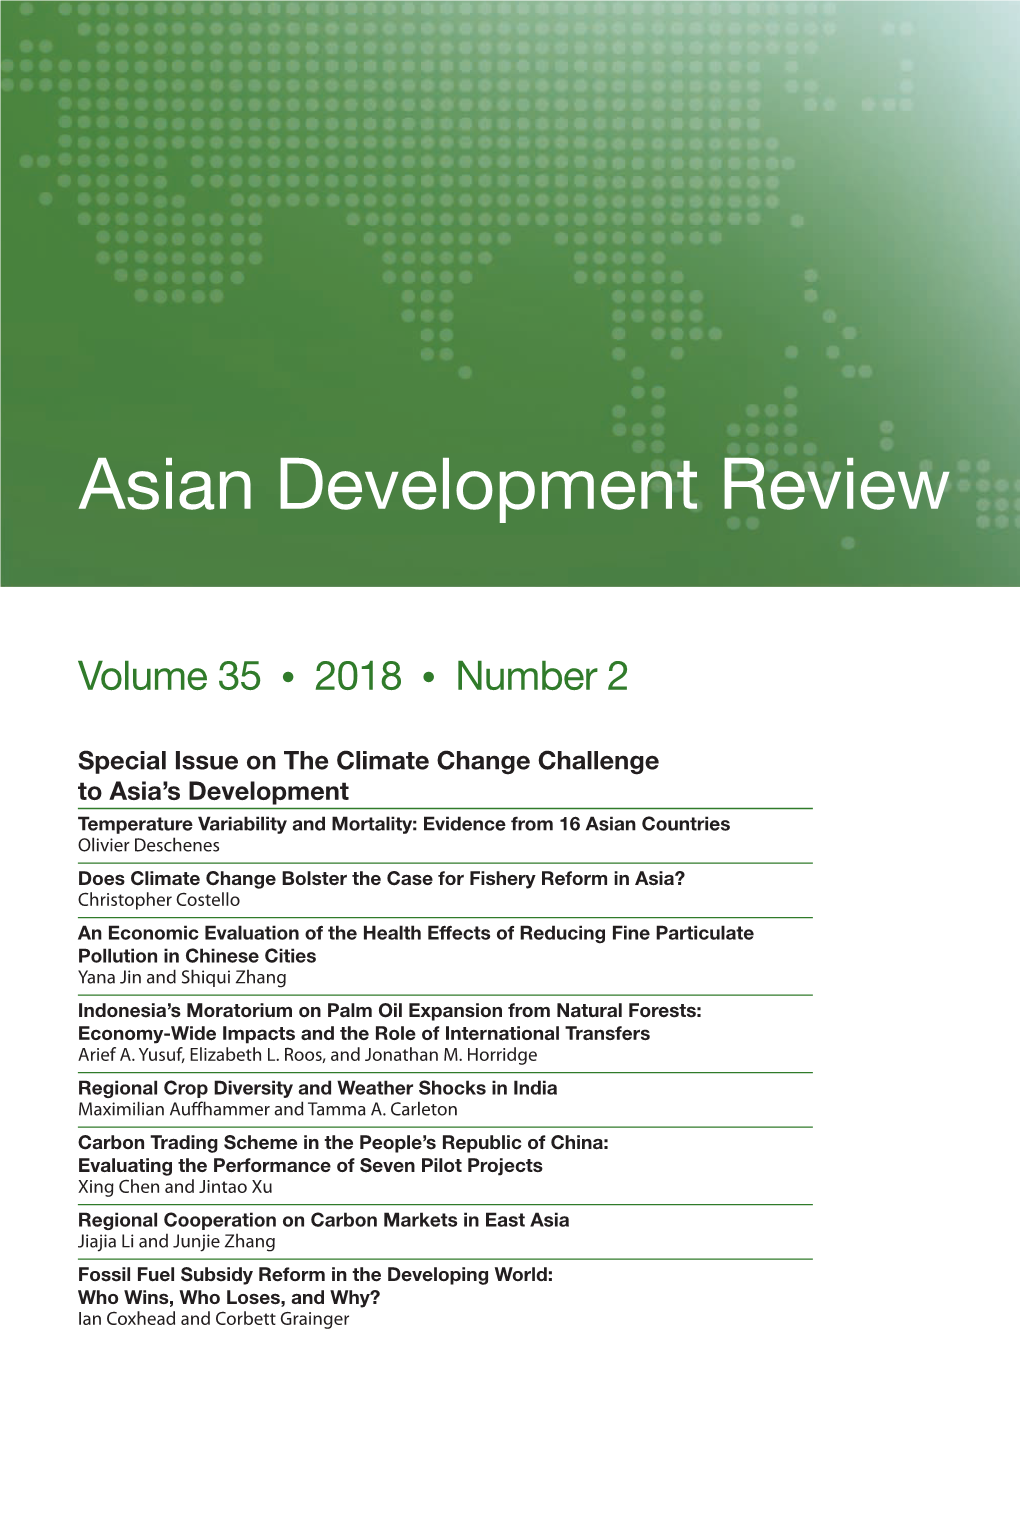 Asian Development Review: Volume 35, Number 2